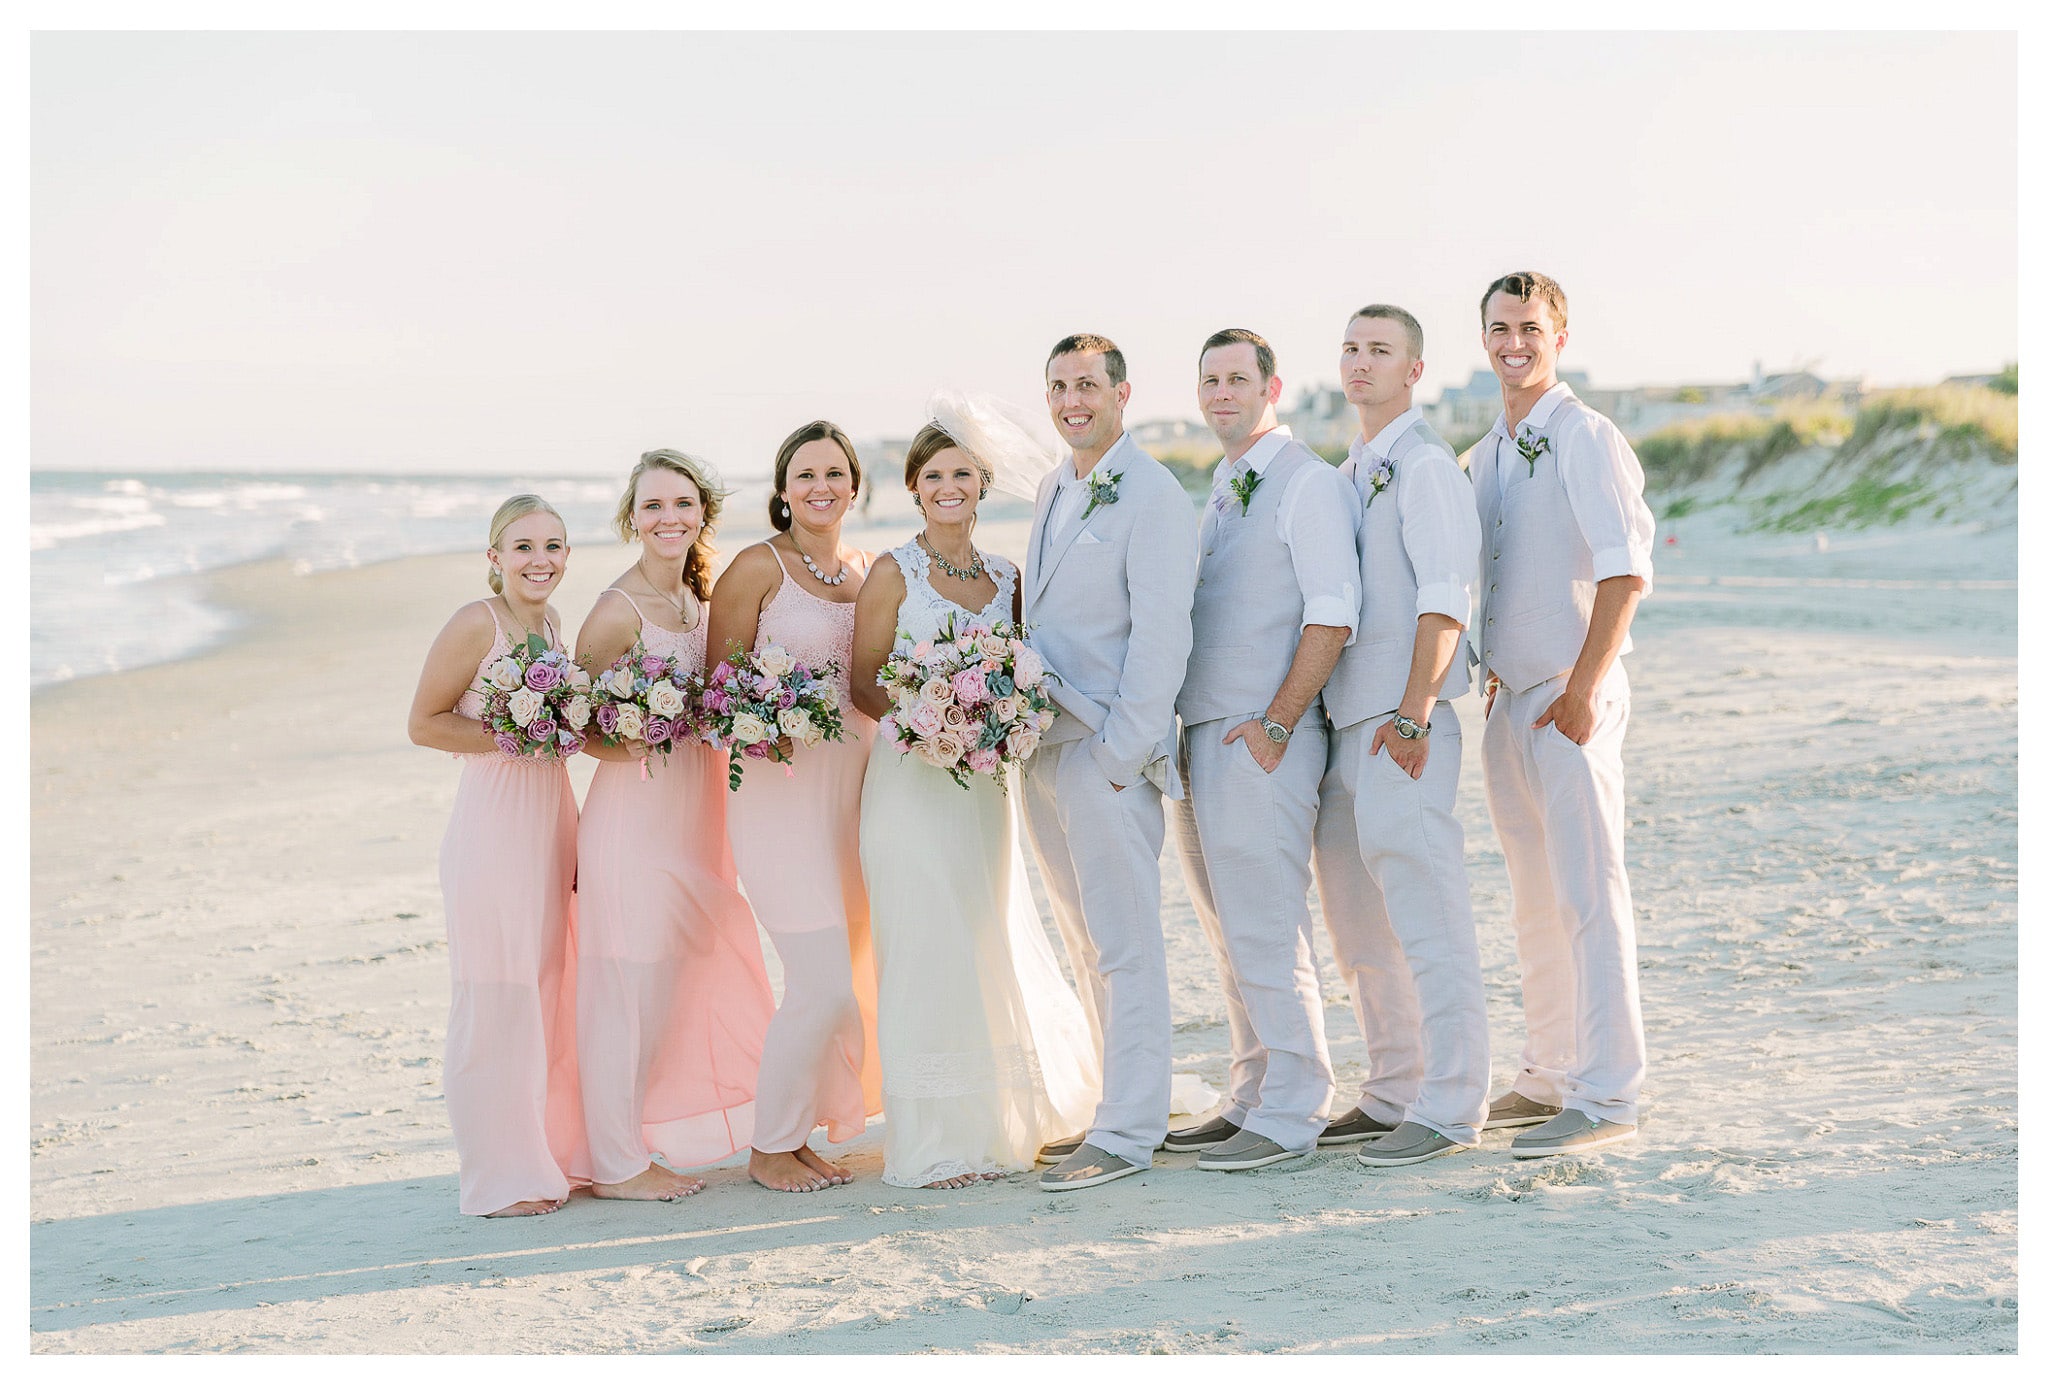 The Wedding Party on the Sand Bride and Maids, Groom and Groomsmen - Venue - Beach House Gulf Stream Breeze, Beach Realty Catering and Cake - Buttercream Cakes and Catering, LLC Flowers - Callas Florist Event Rentals - Event Works DJ - Scott Shaw